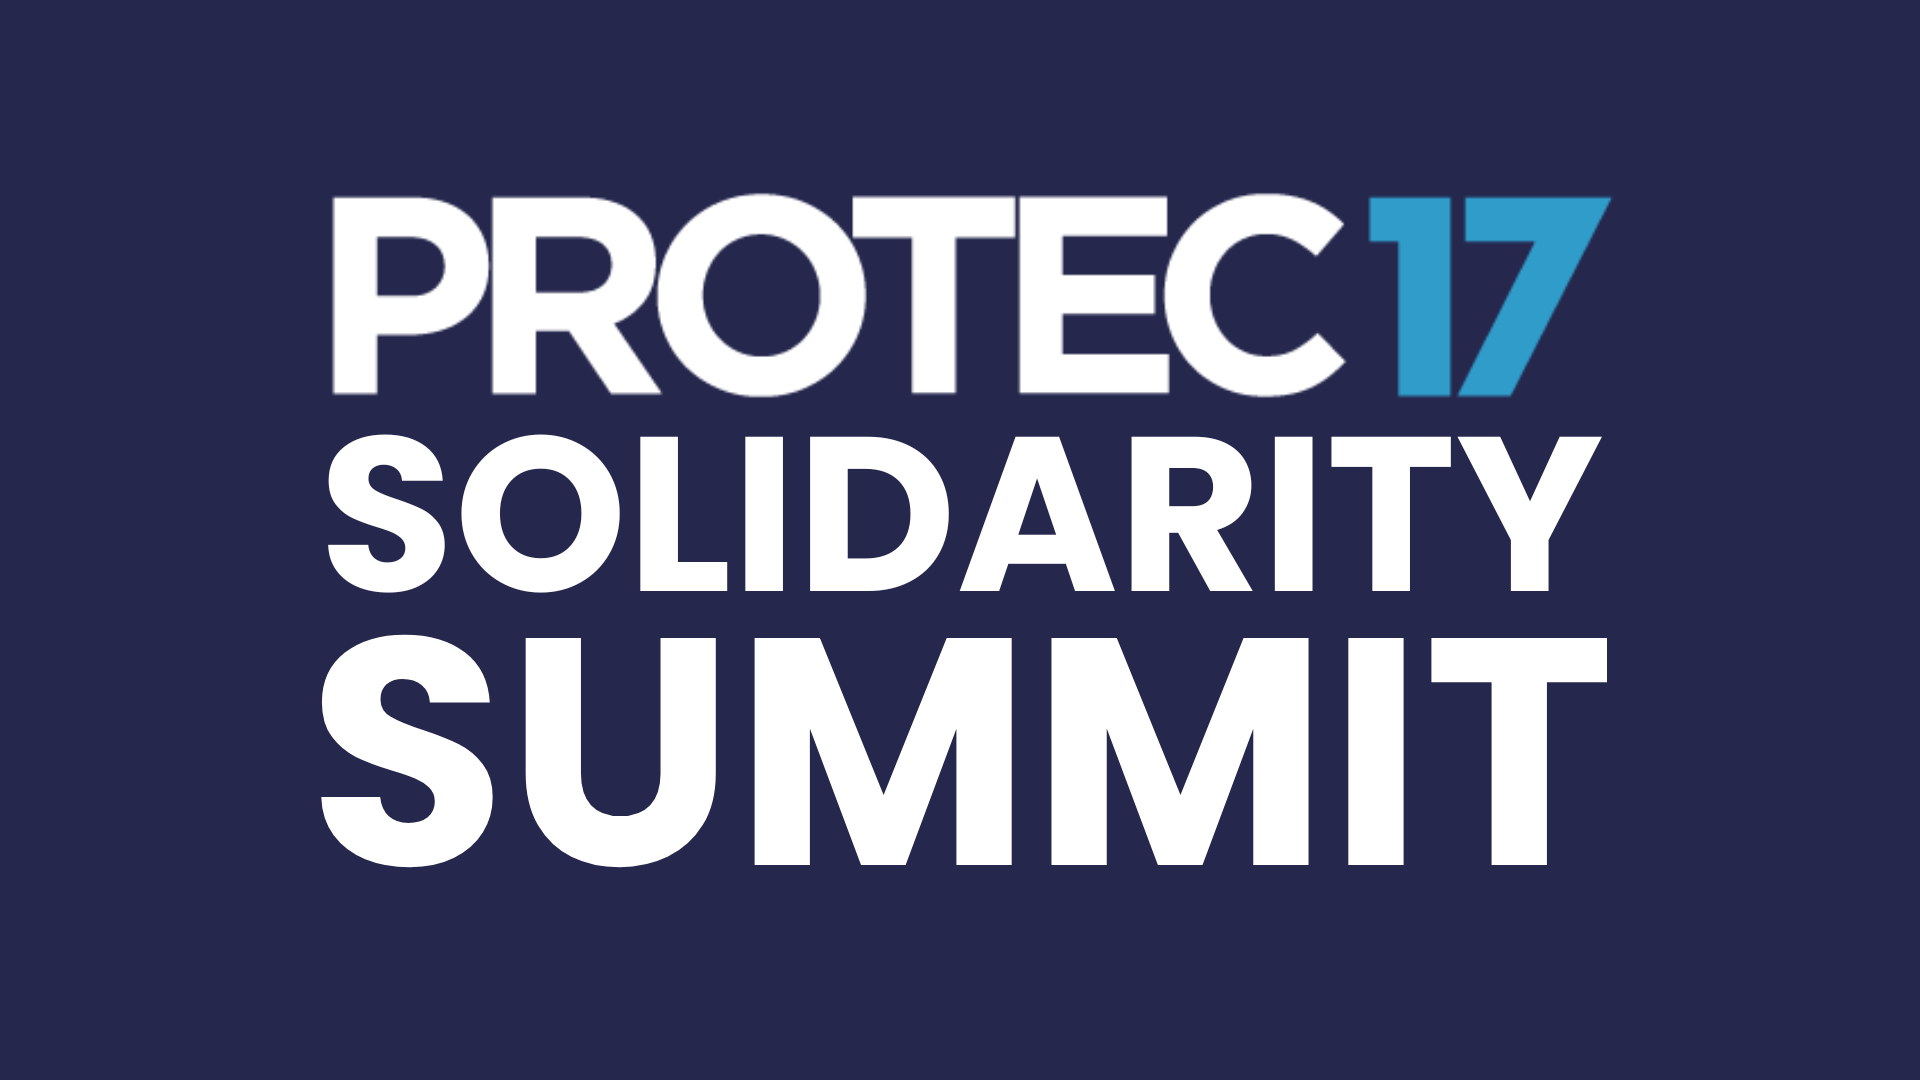 The PROTEC17 logo is stacked on top of the words, "SOLIDARITY SUMMIT" on a dark blue background.